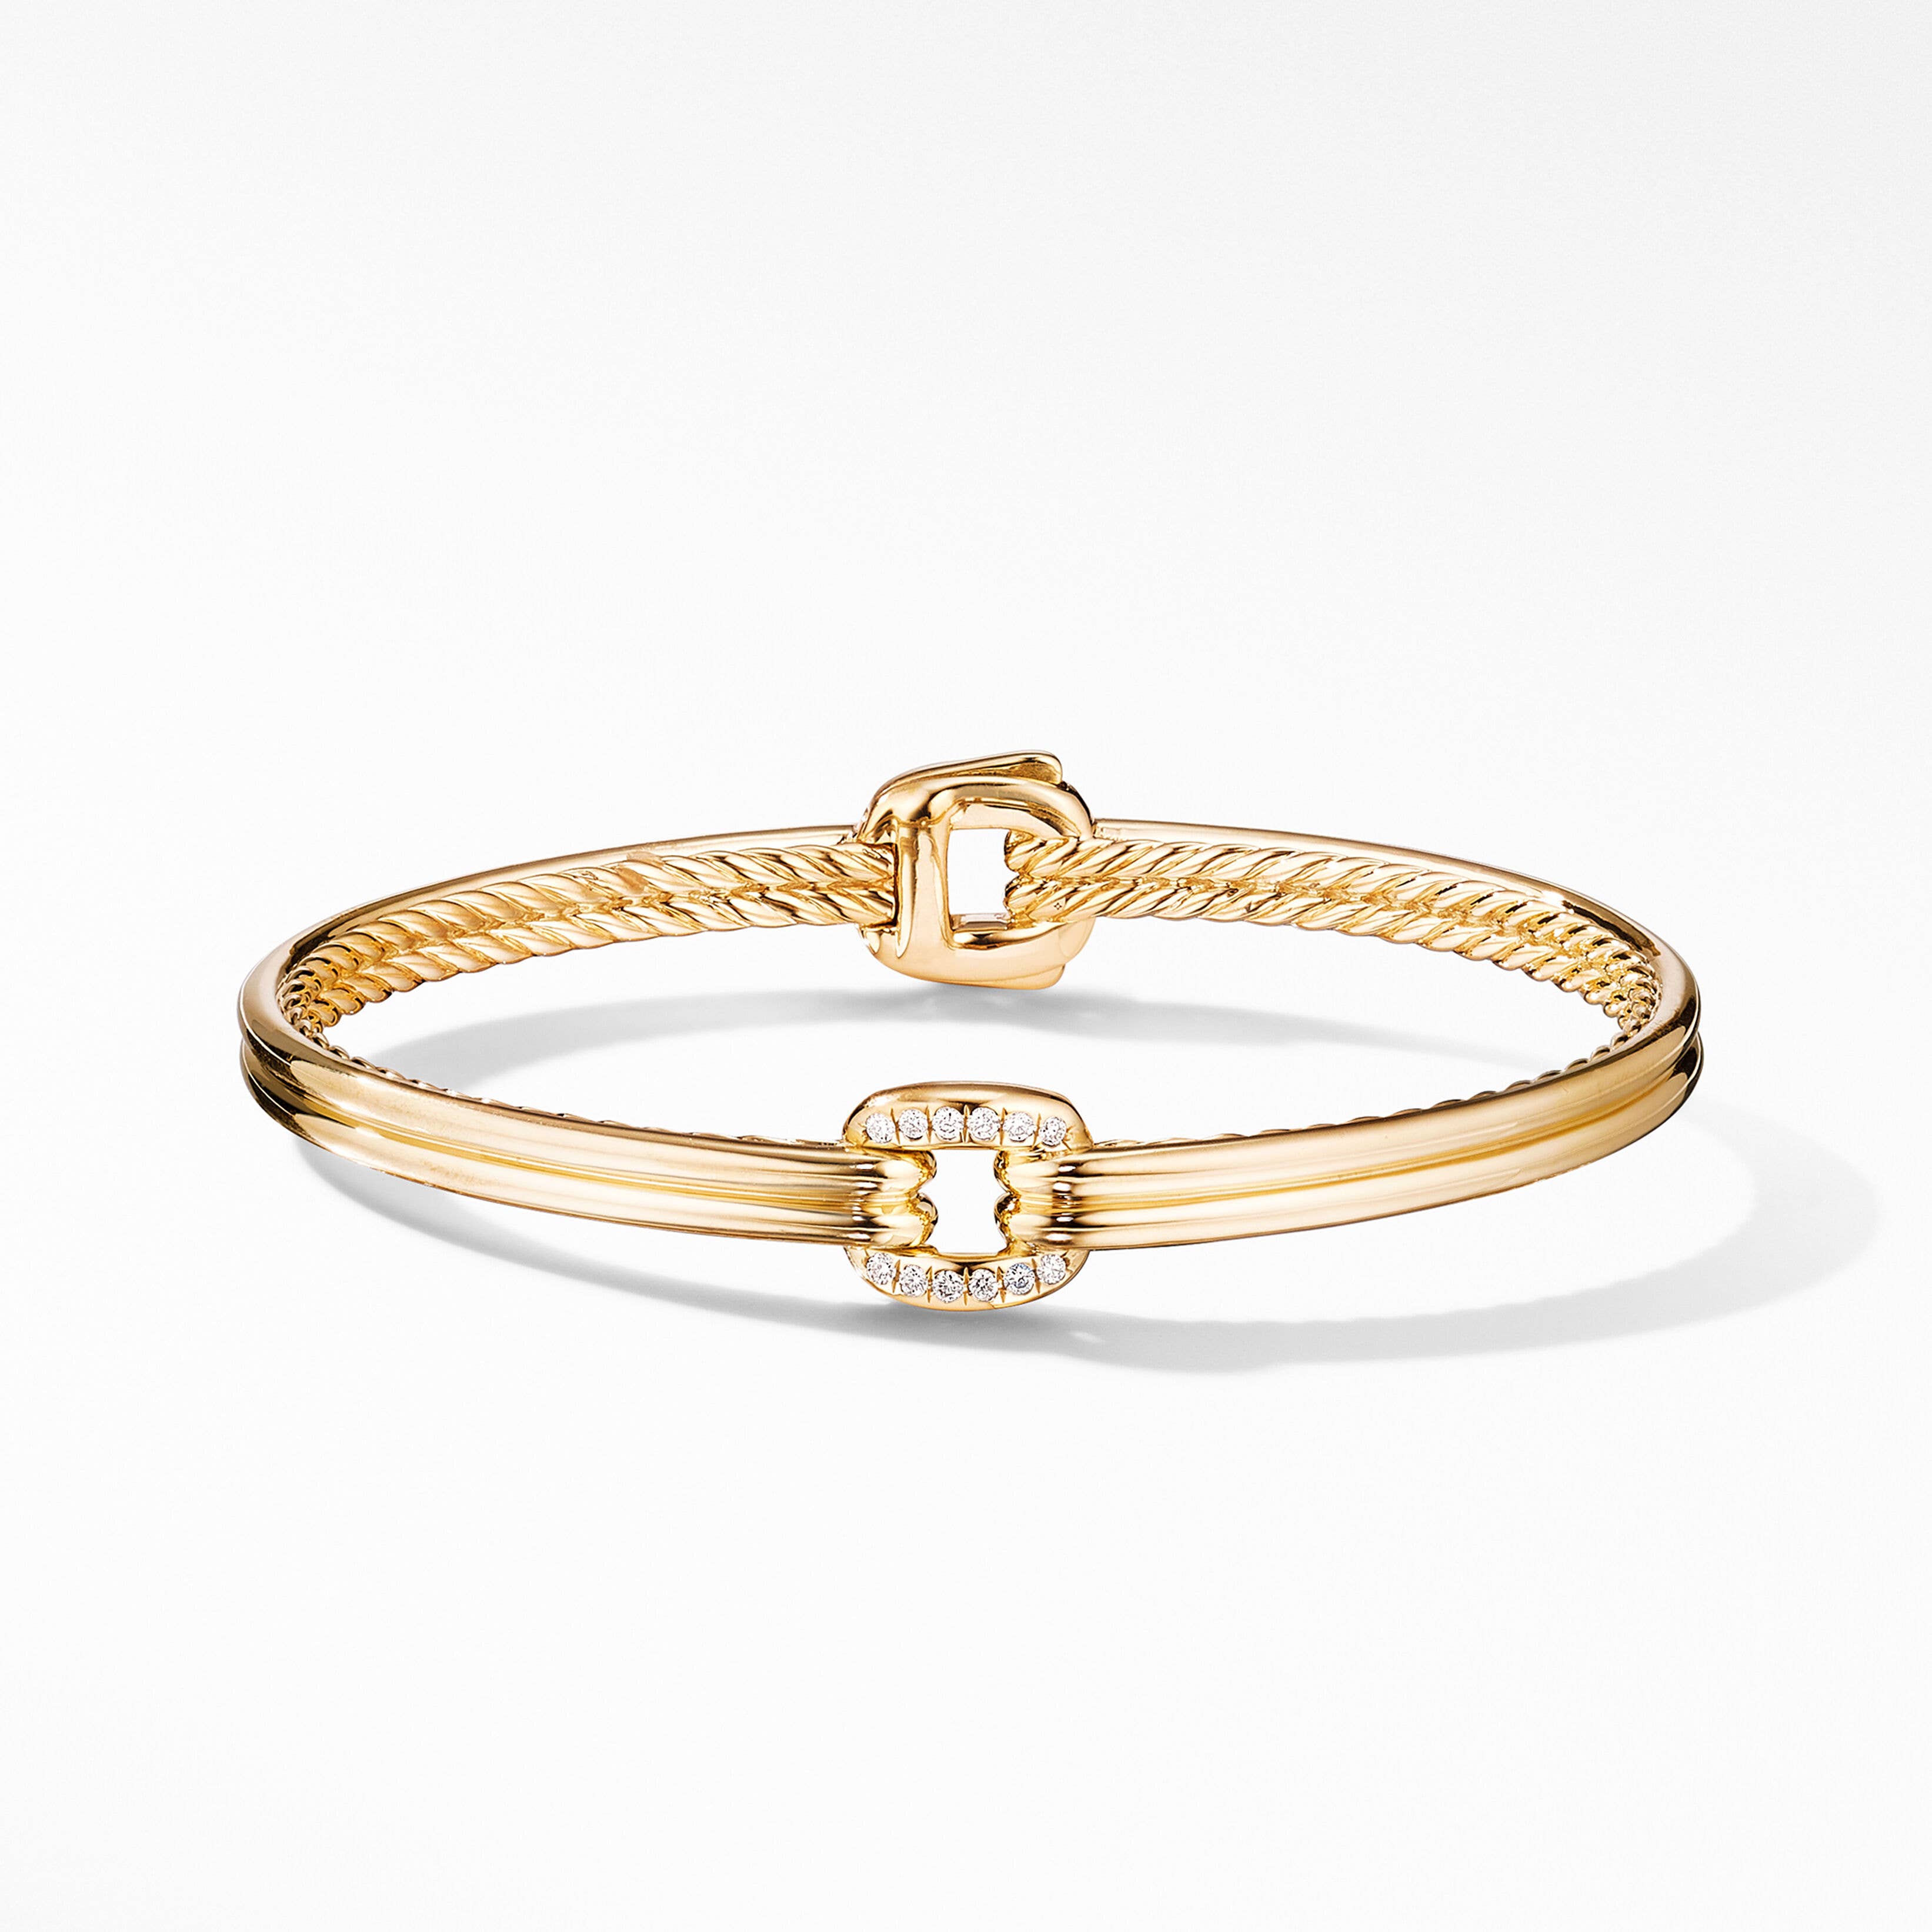 Thoroughbred Center Link Bracelet in 18K Yellow Gold with Pavé Diamonds